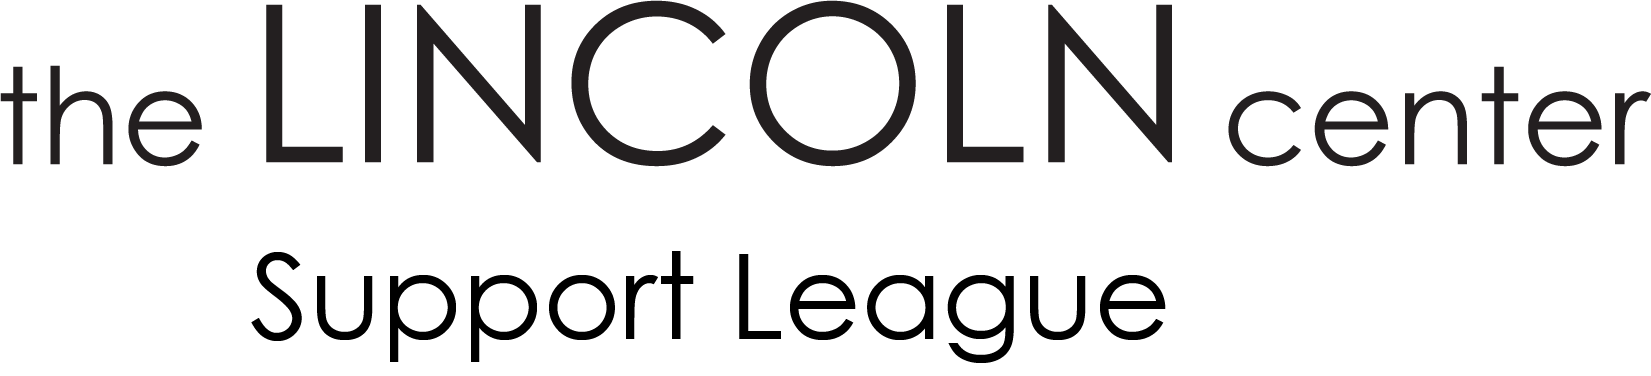 Lincoln Center Support League